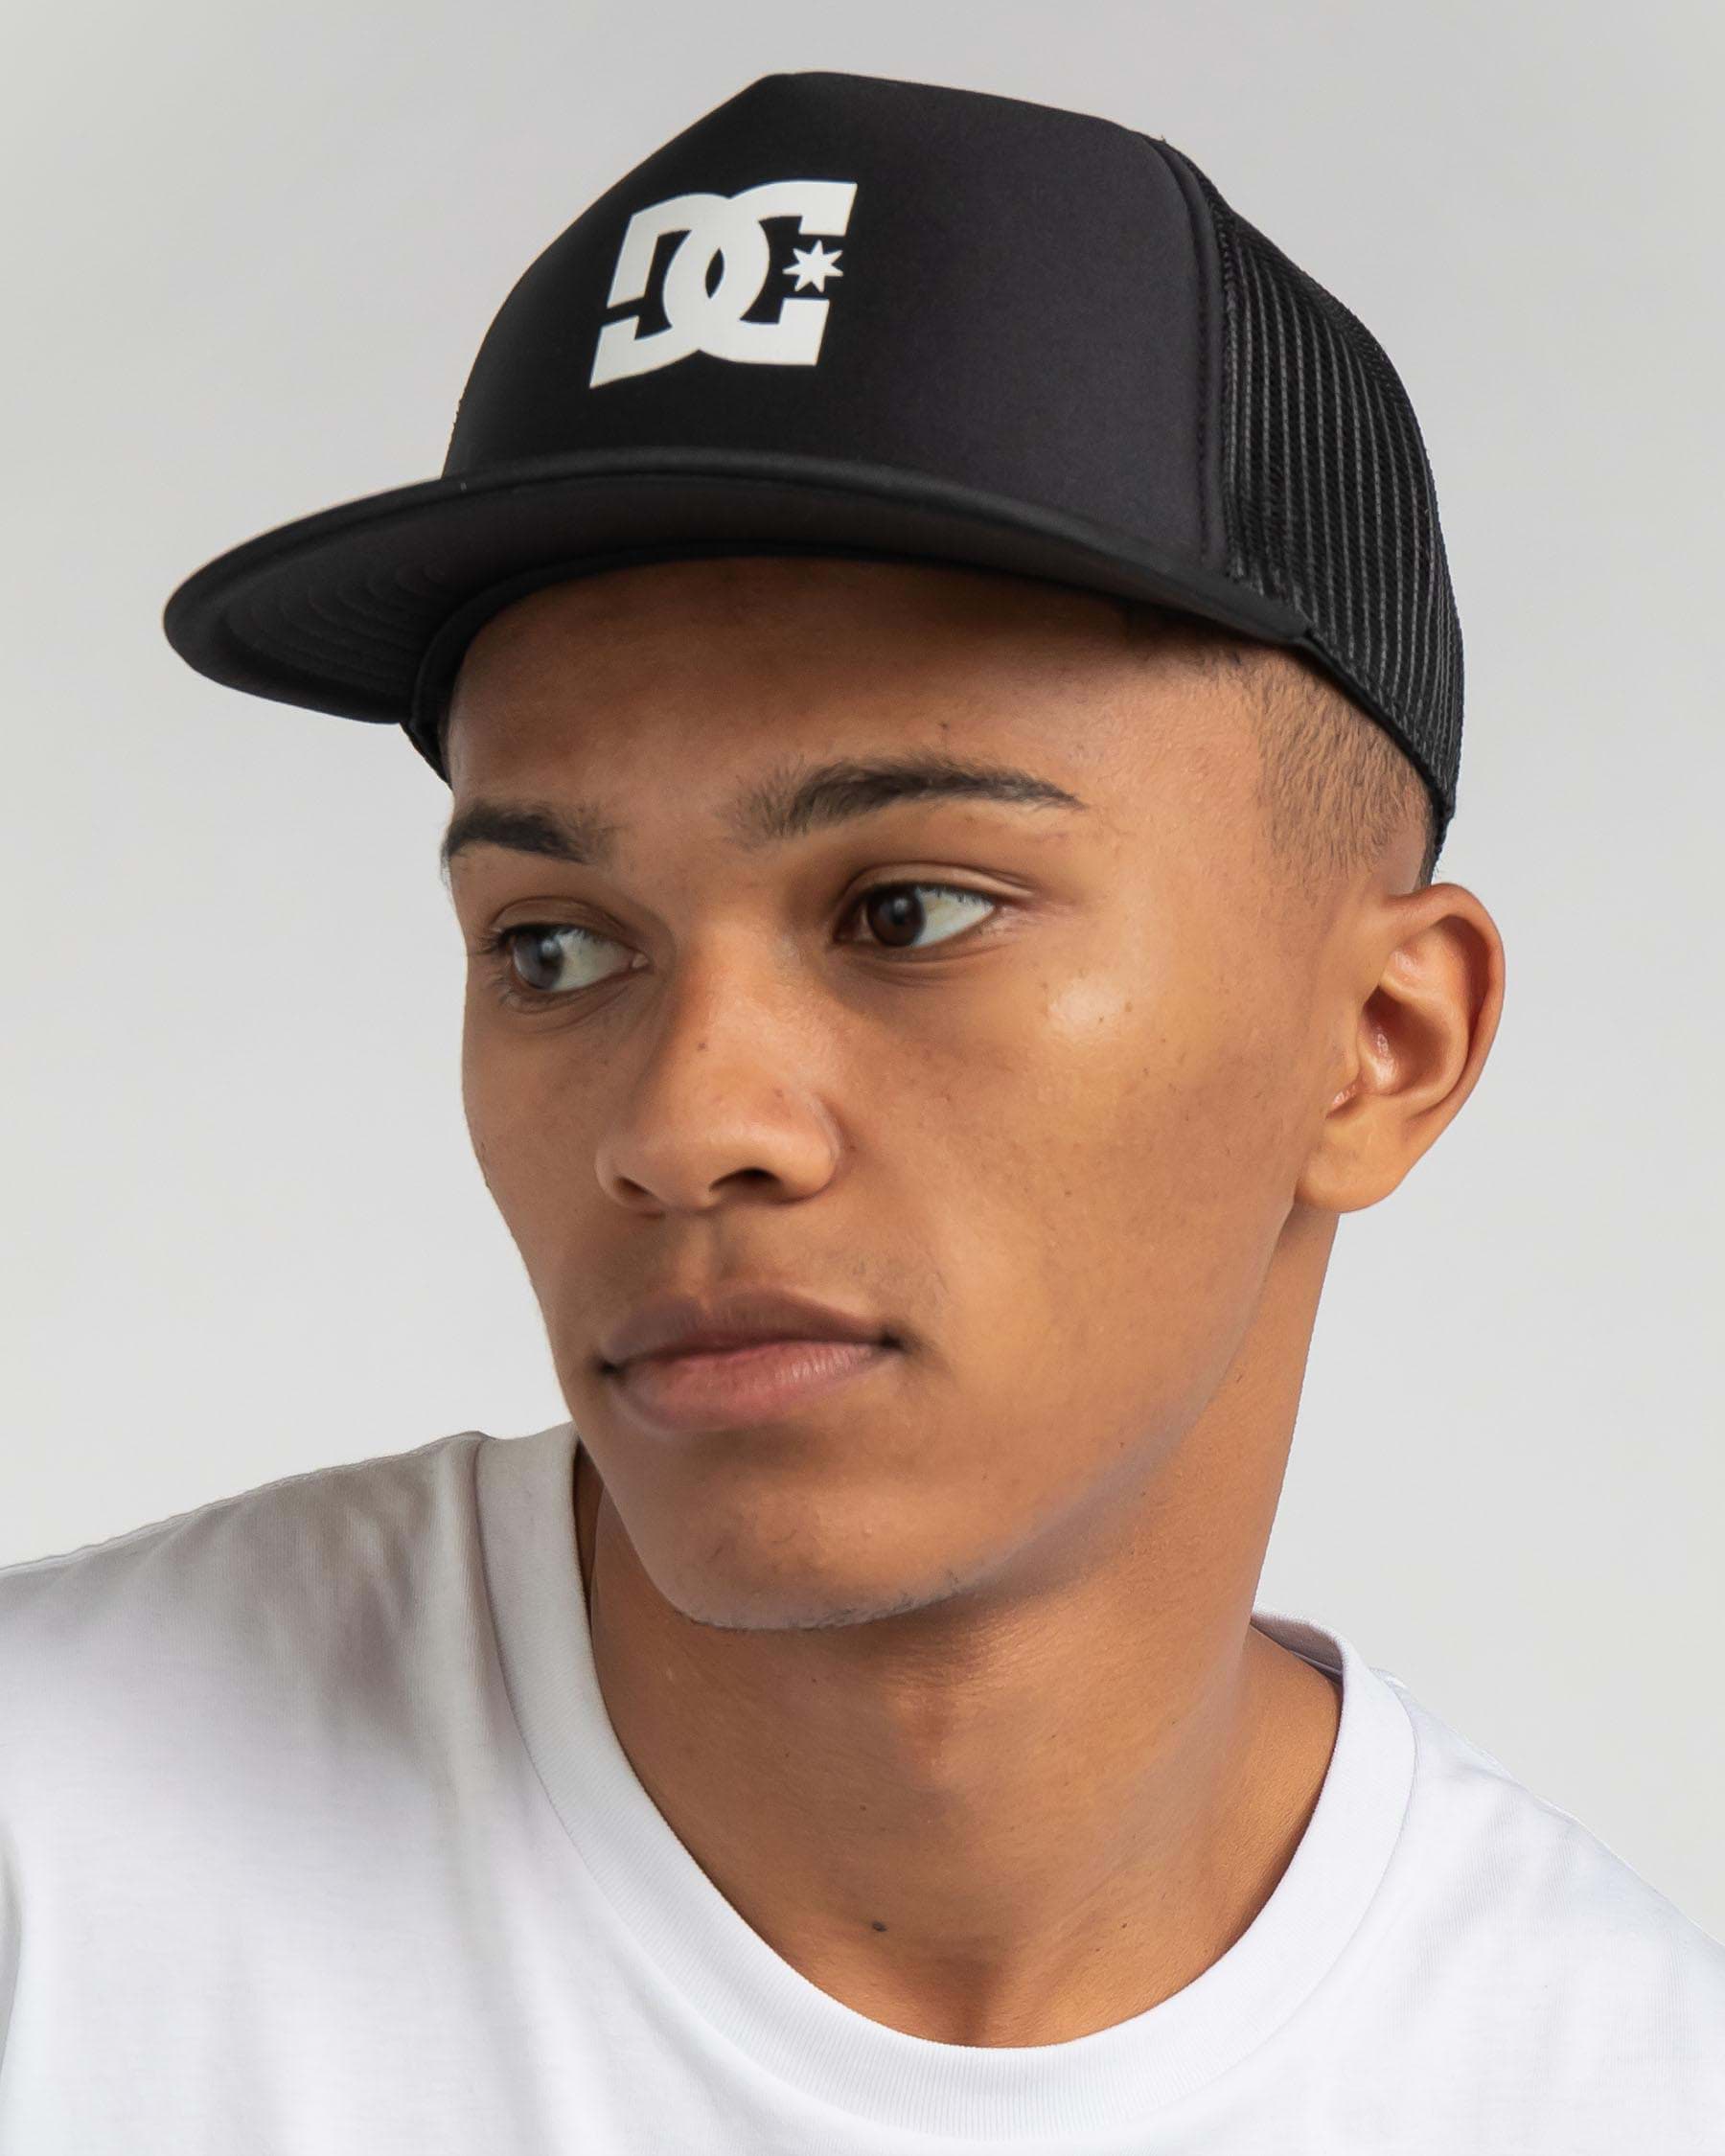 DC Shoes Gas Station Trucker Cap In Black - FREE* Shipping & Easy Returns -  City Beach United States